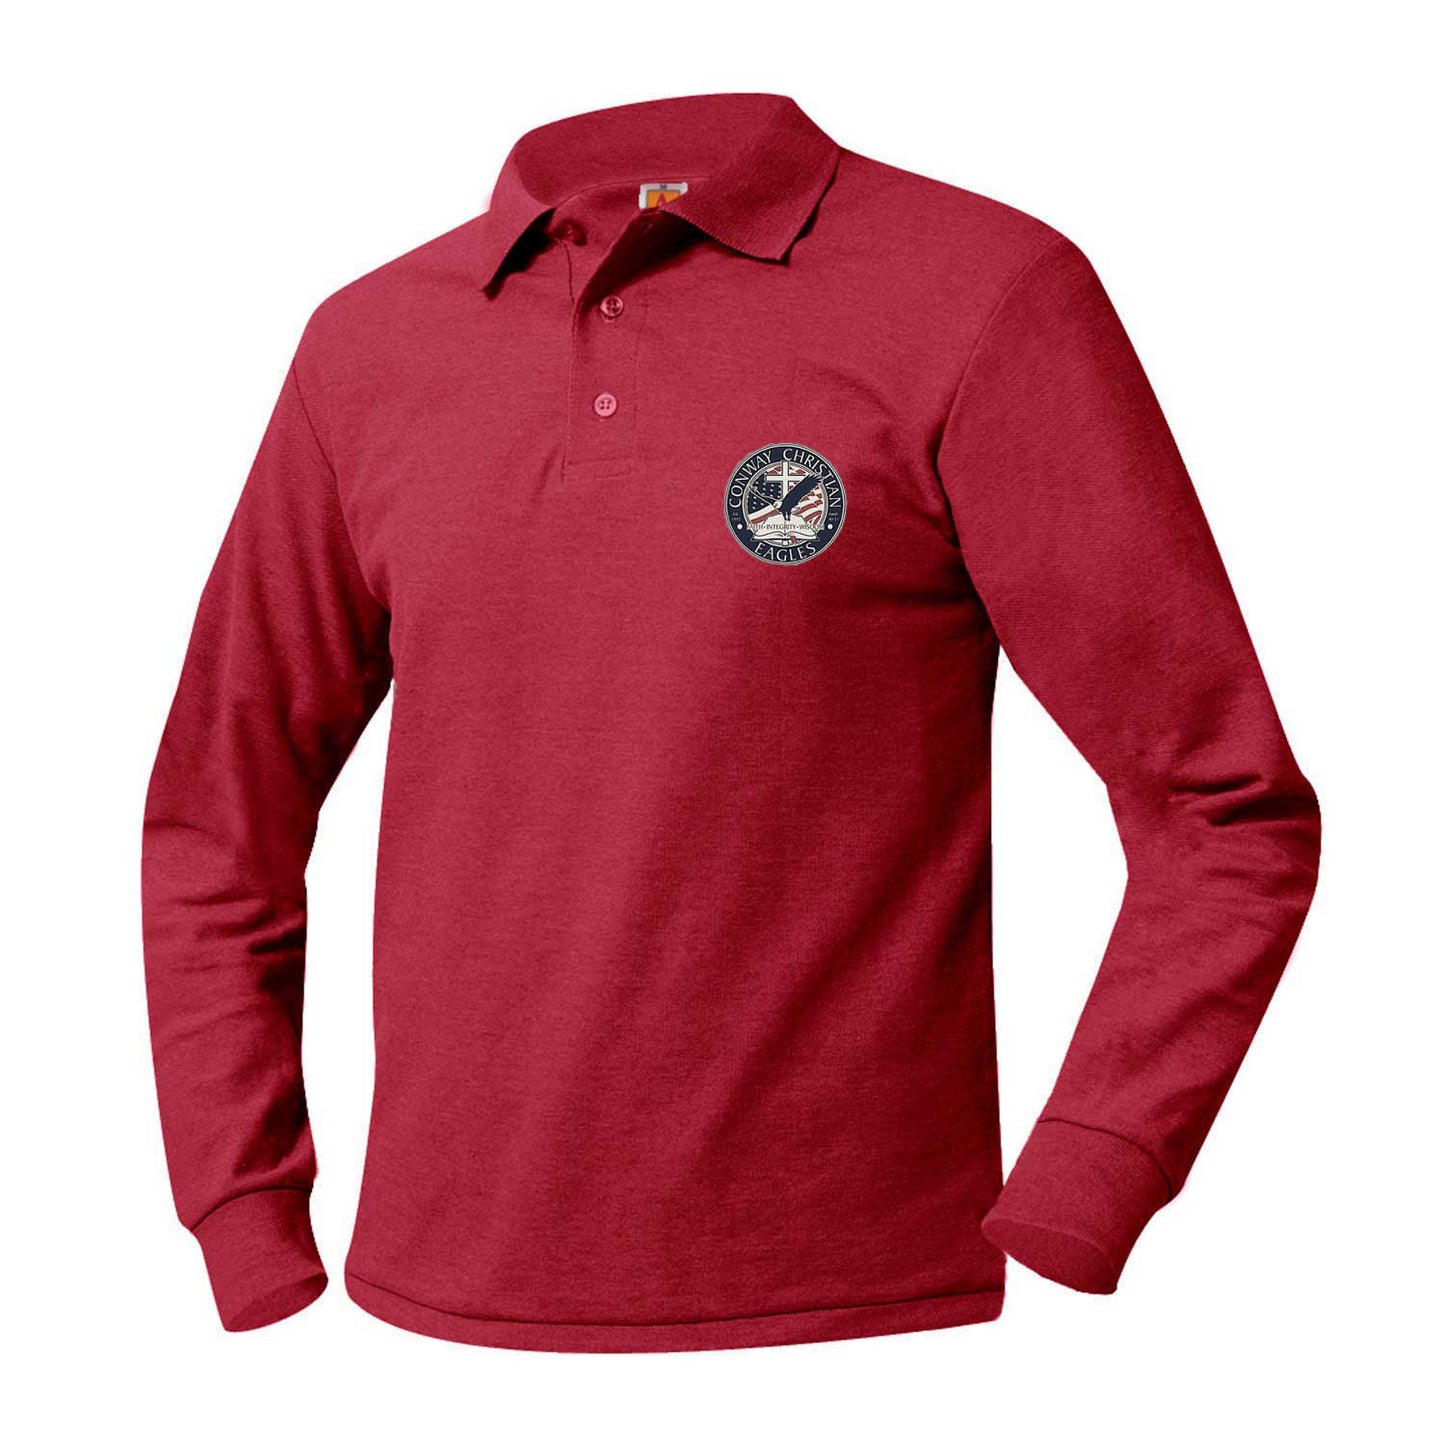 Adult Long Sleeve Smooth Polo With Conway Christian School Logo